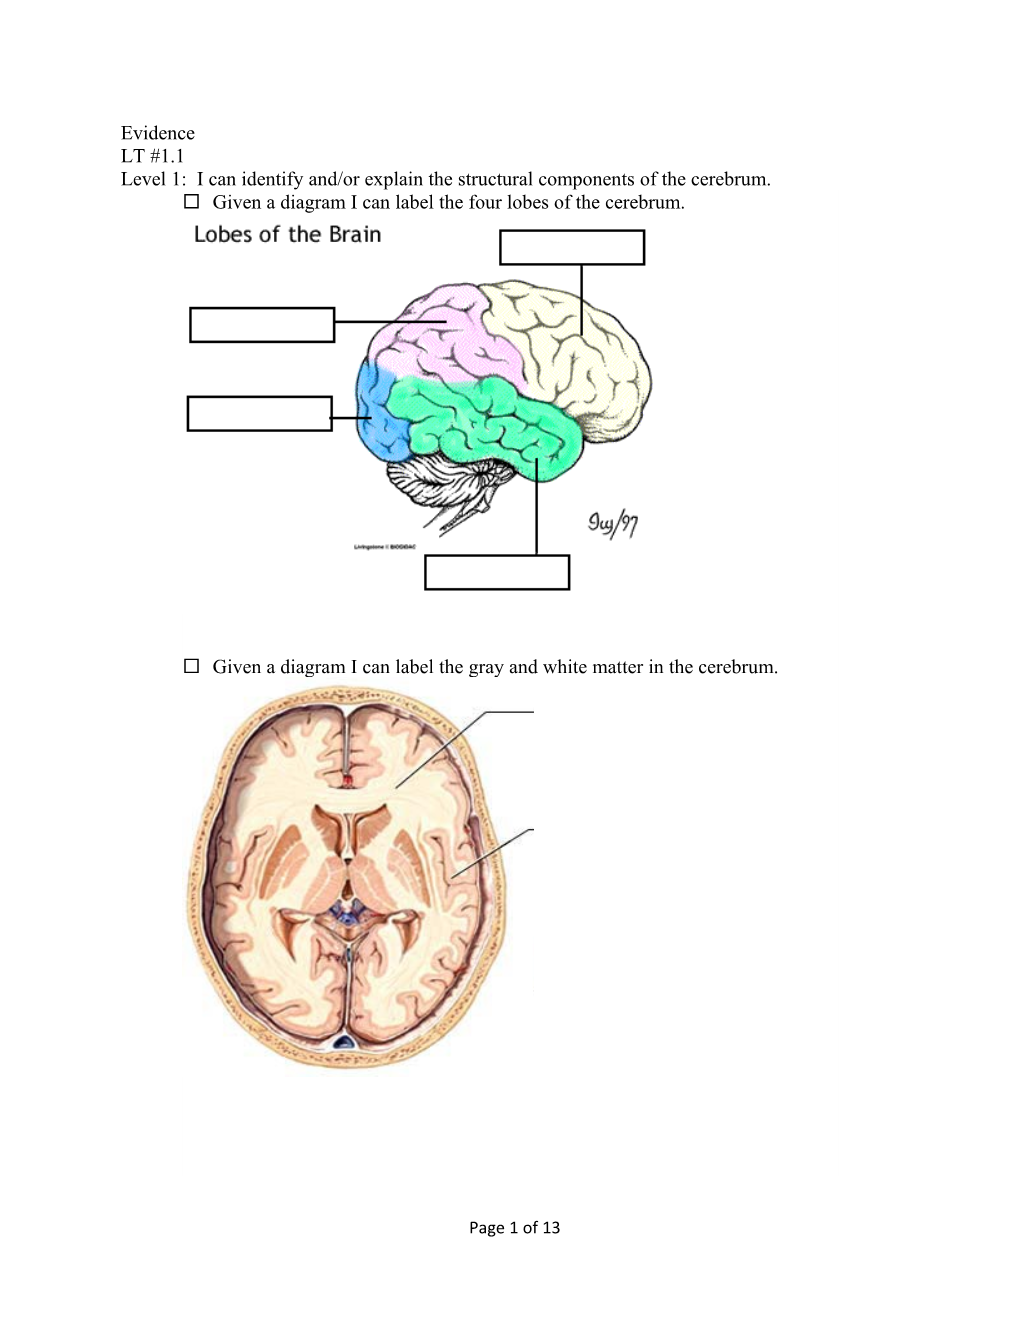 Level 1: I Can Identify And/Or Explain the Structural Components of the Cerebrum